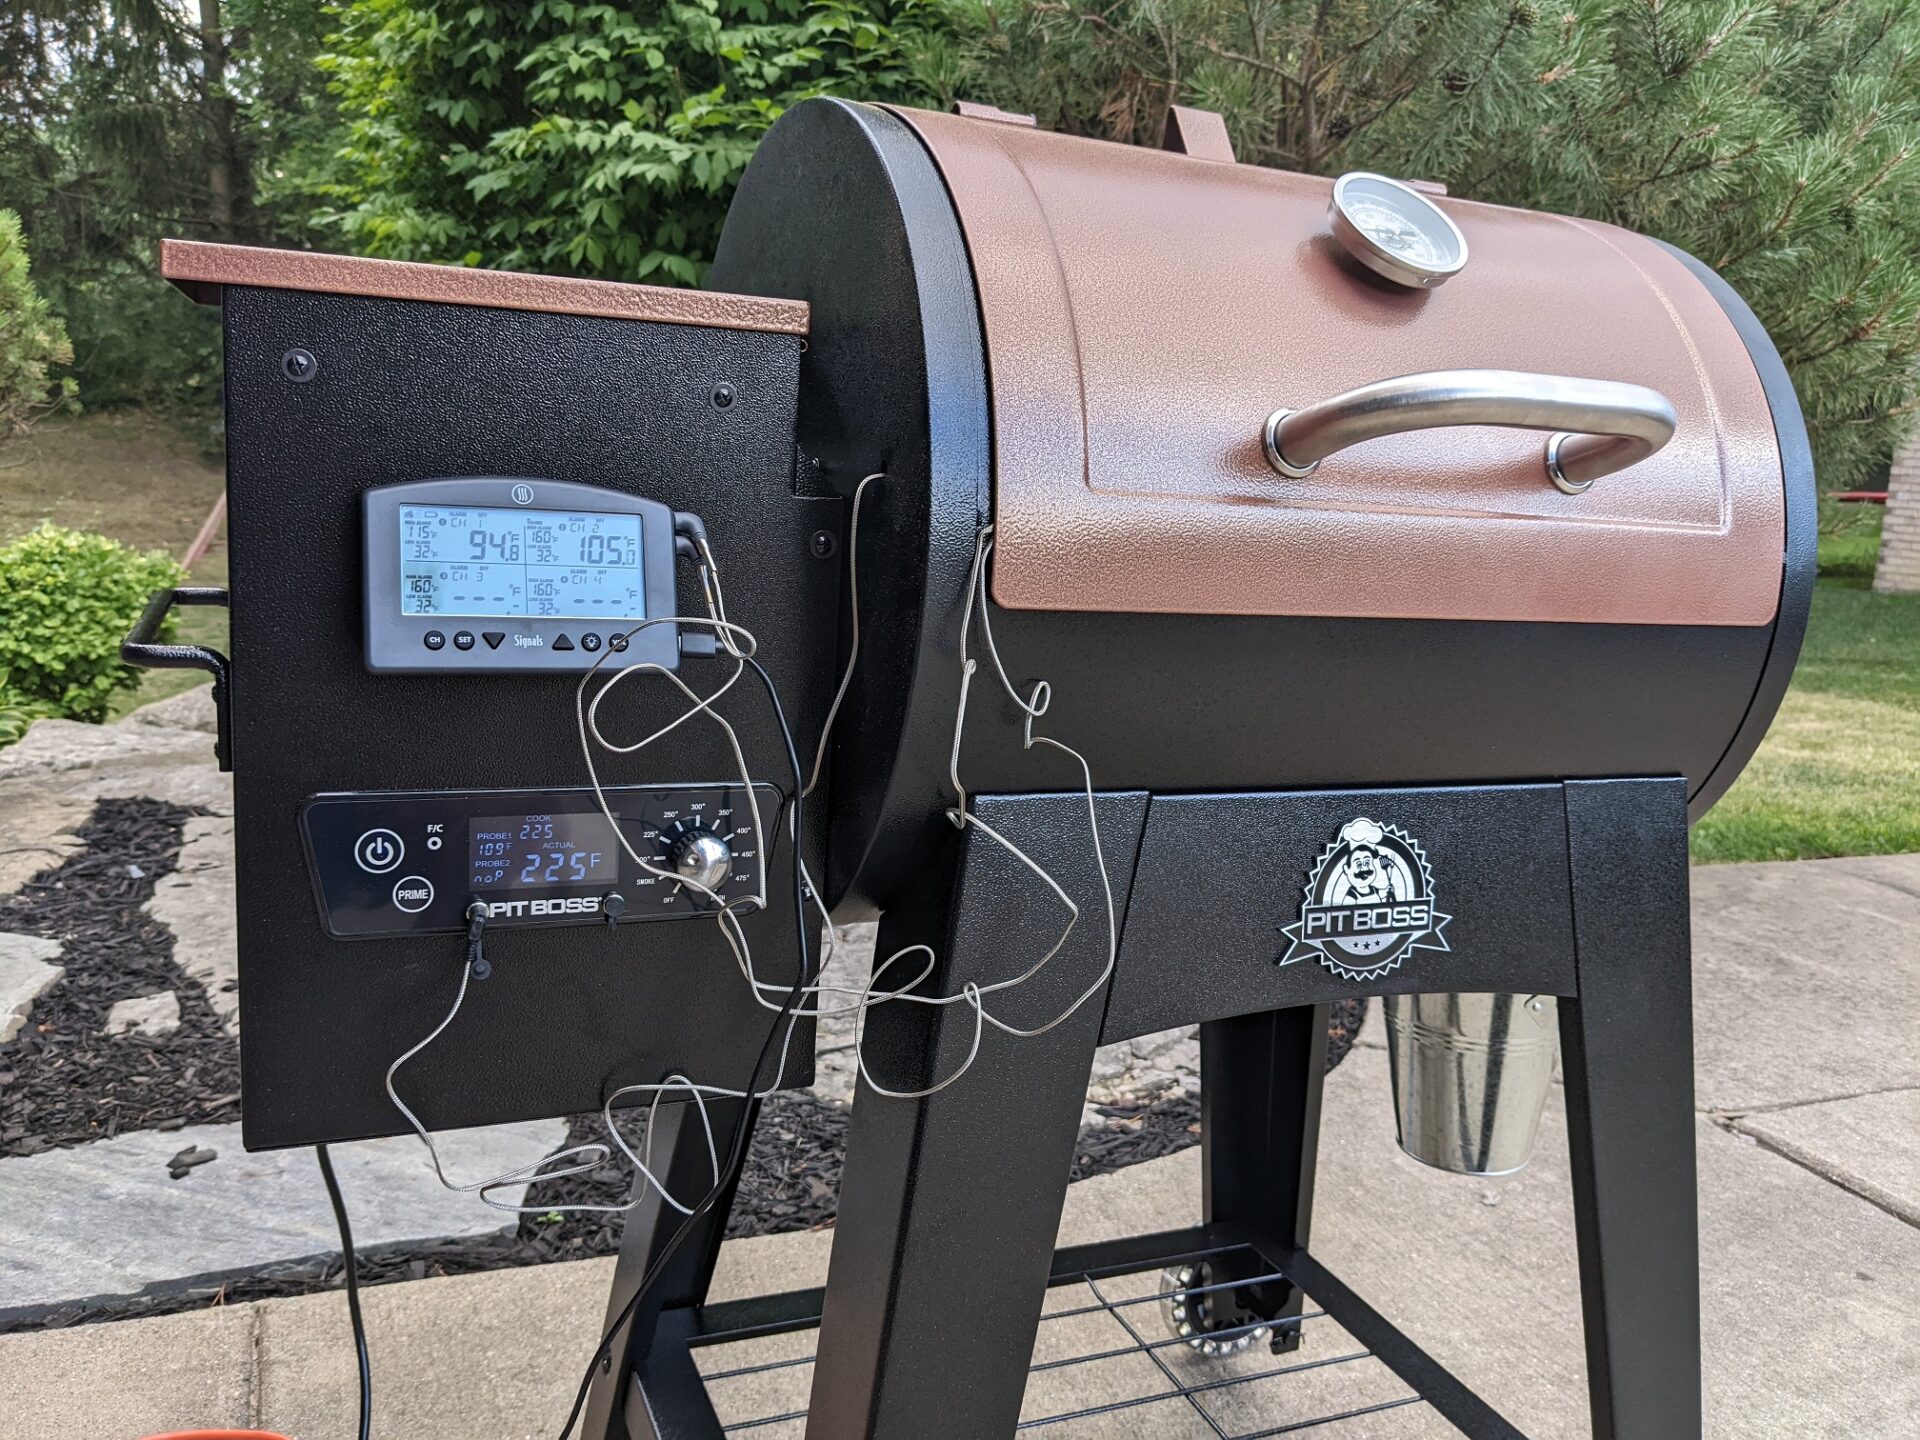 Pit Boss Lexington Review - Great Value, How to Improve + Pit Boss Smoker Tips - CookOut News | Grill Business News, Grill Reviews, Grill